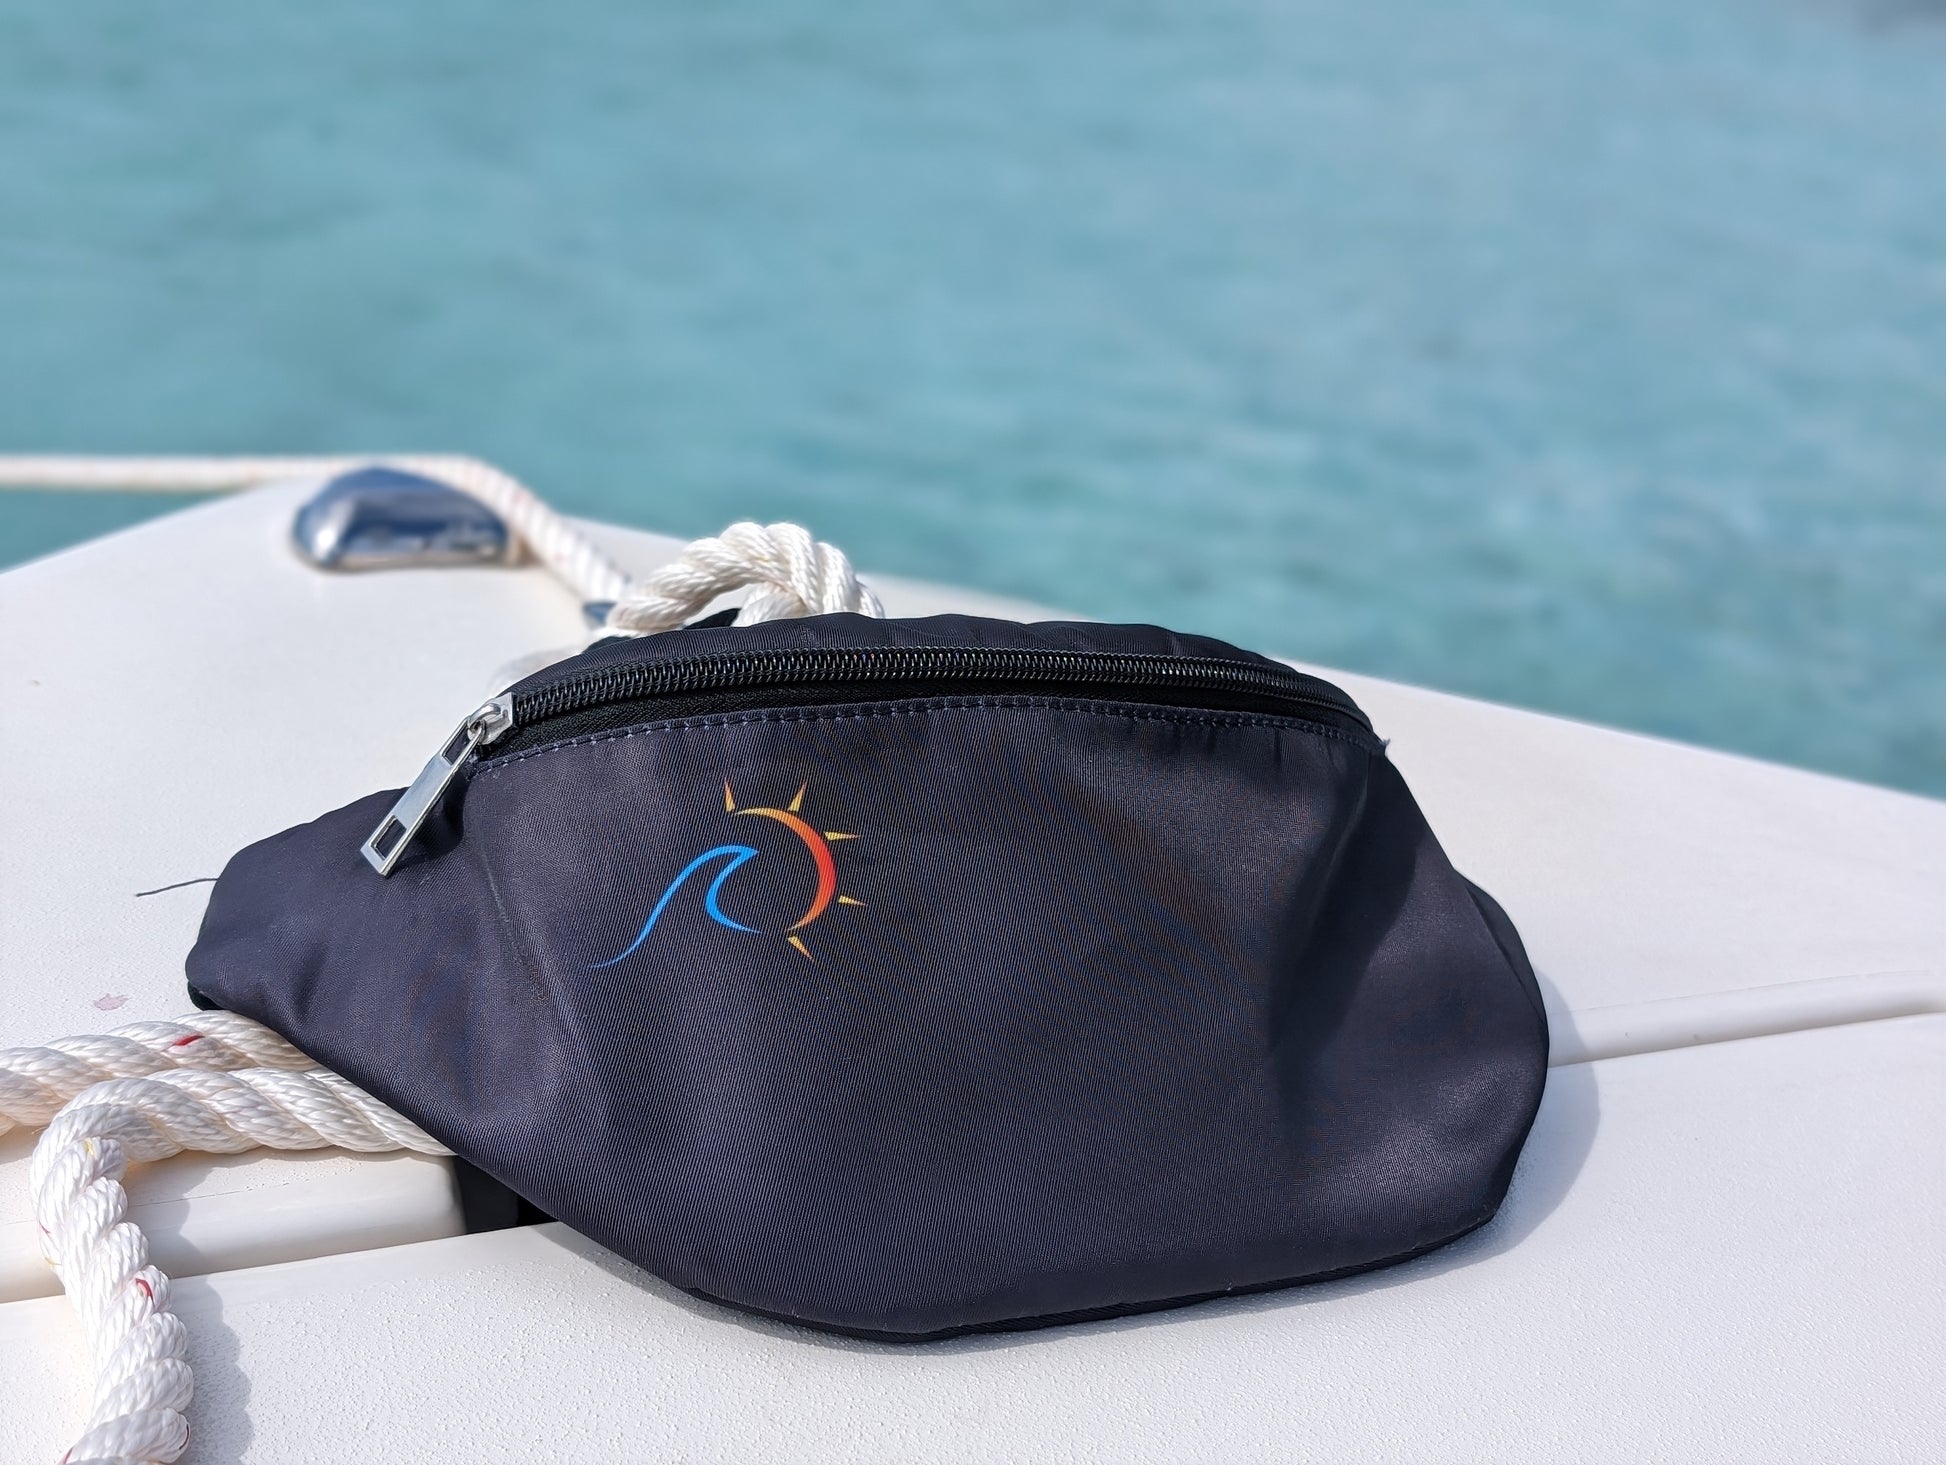 Black fanny pack with sublimated logo lying on a white surface with a rope coiled beside it.